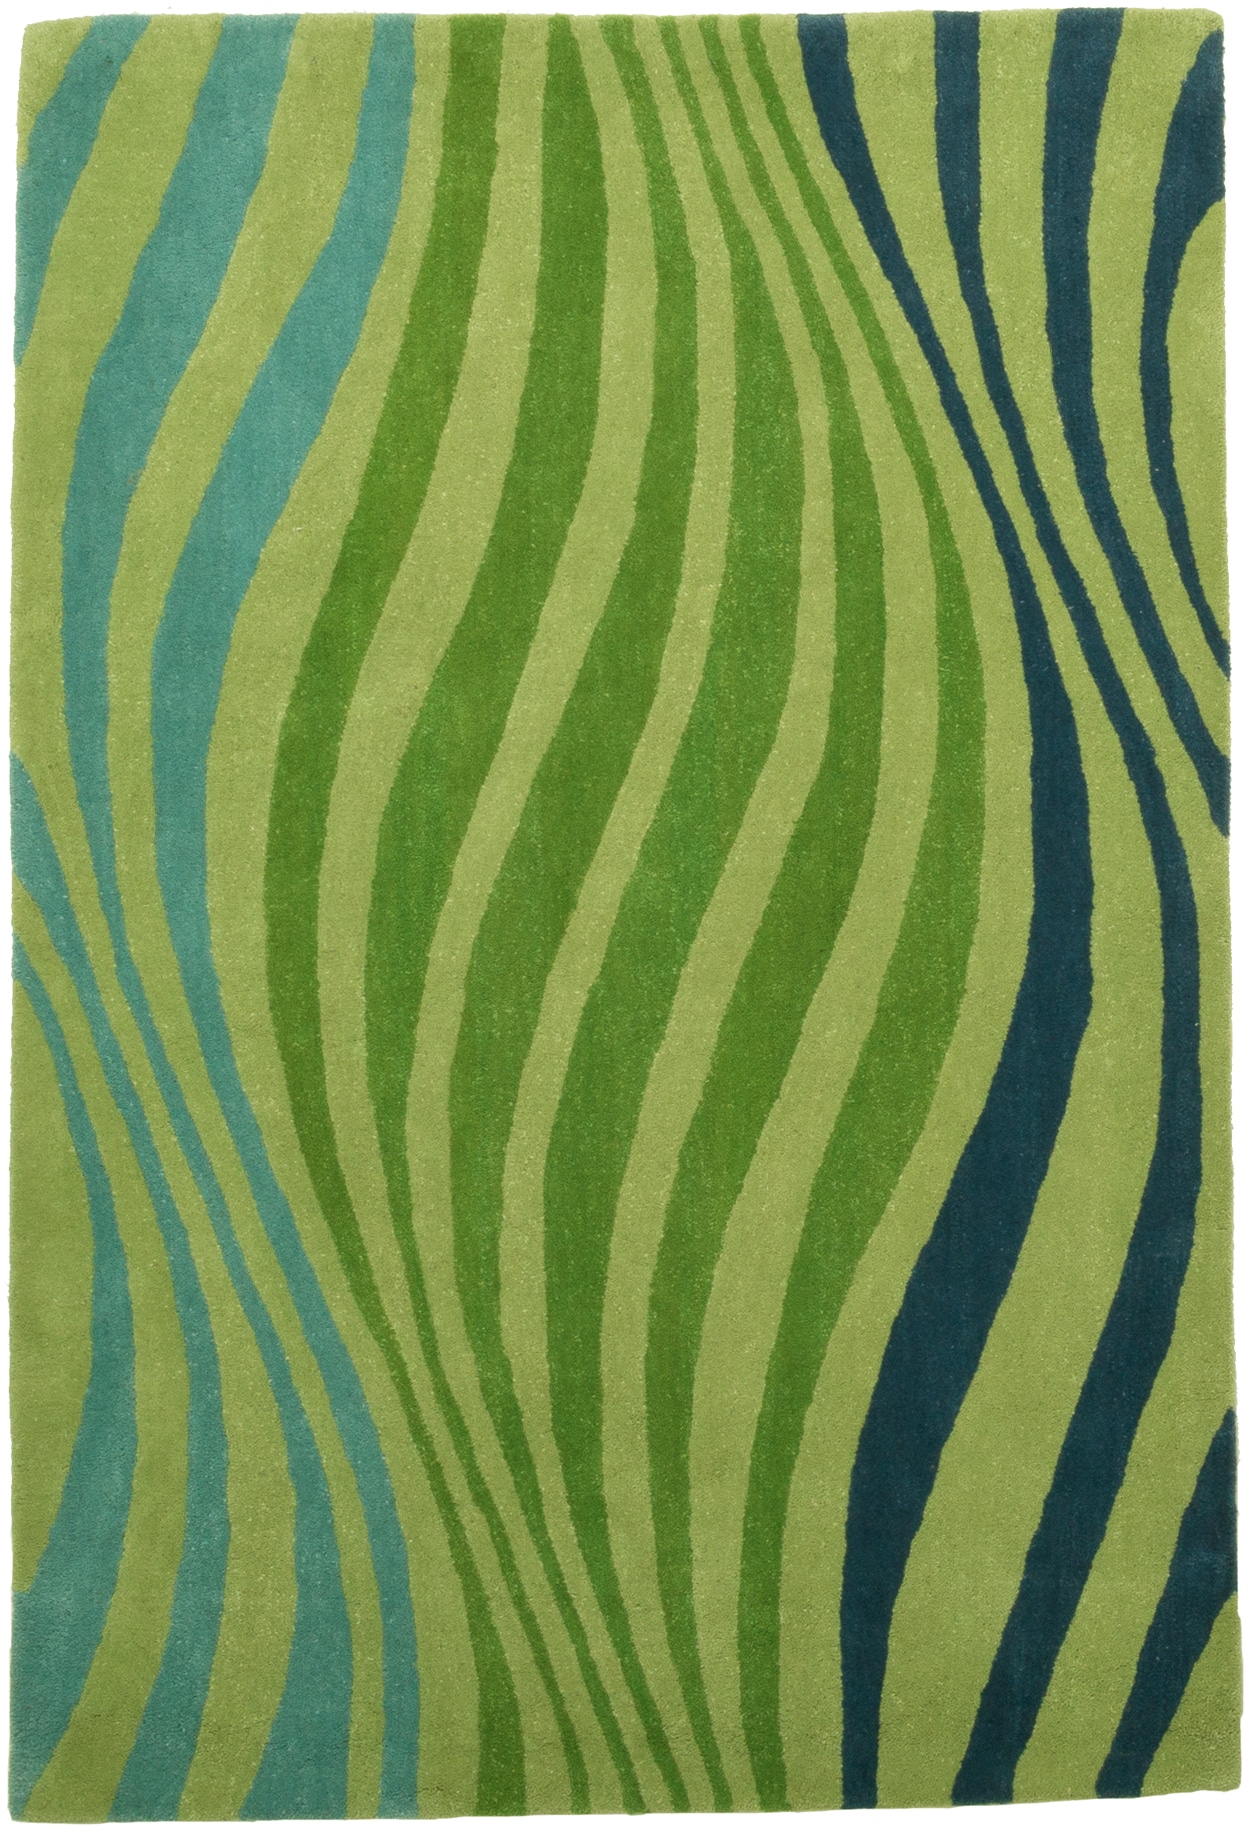 Christopher Farr (b. 1953) Sulpice Hand-tufted rug, wool 1.22 x 1.83 m Edition of 150